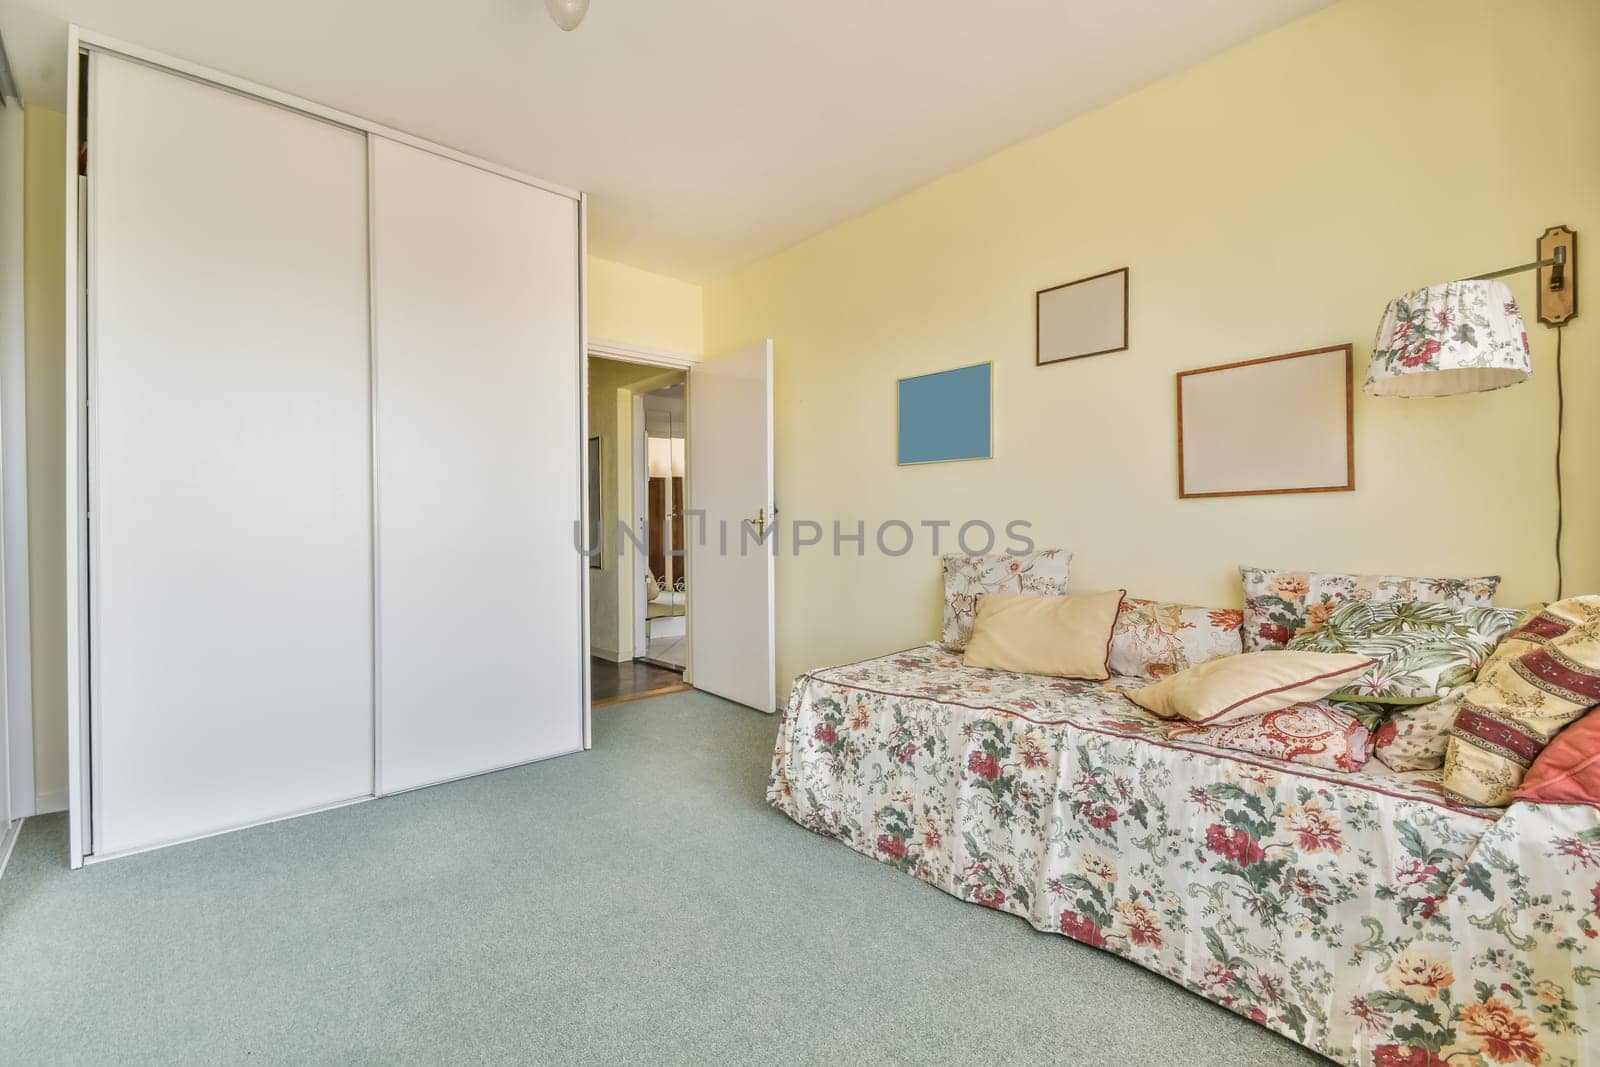 a living room with yellow walls and floral bed spread across the room, there is an open door leading to another room